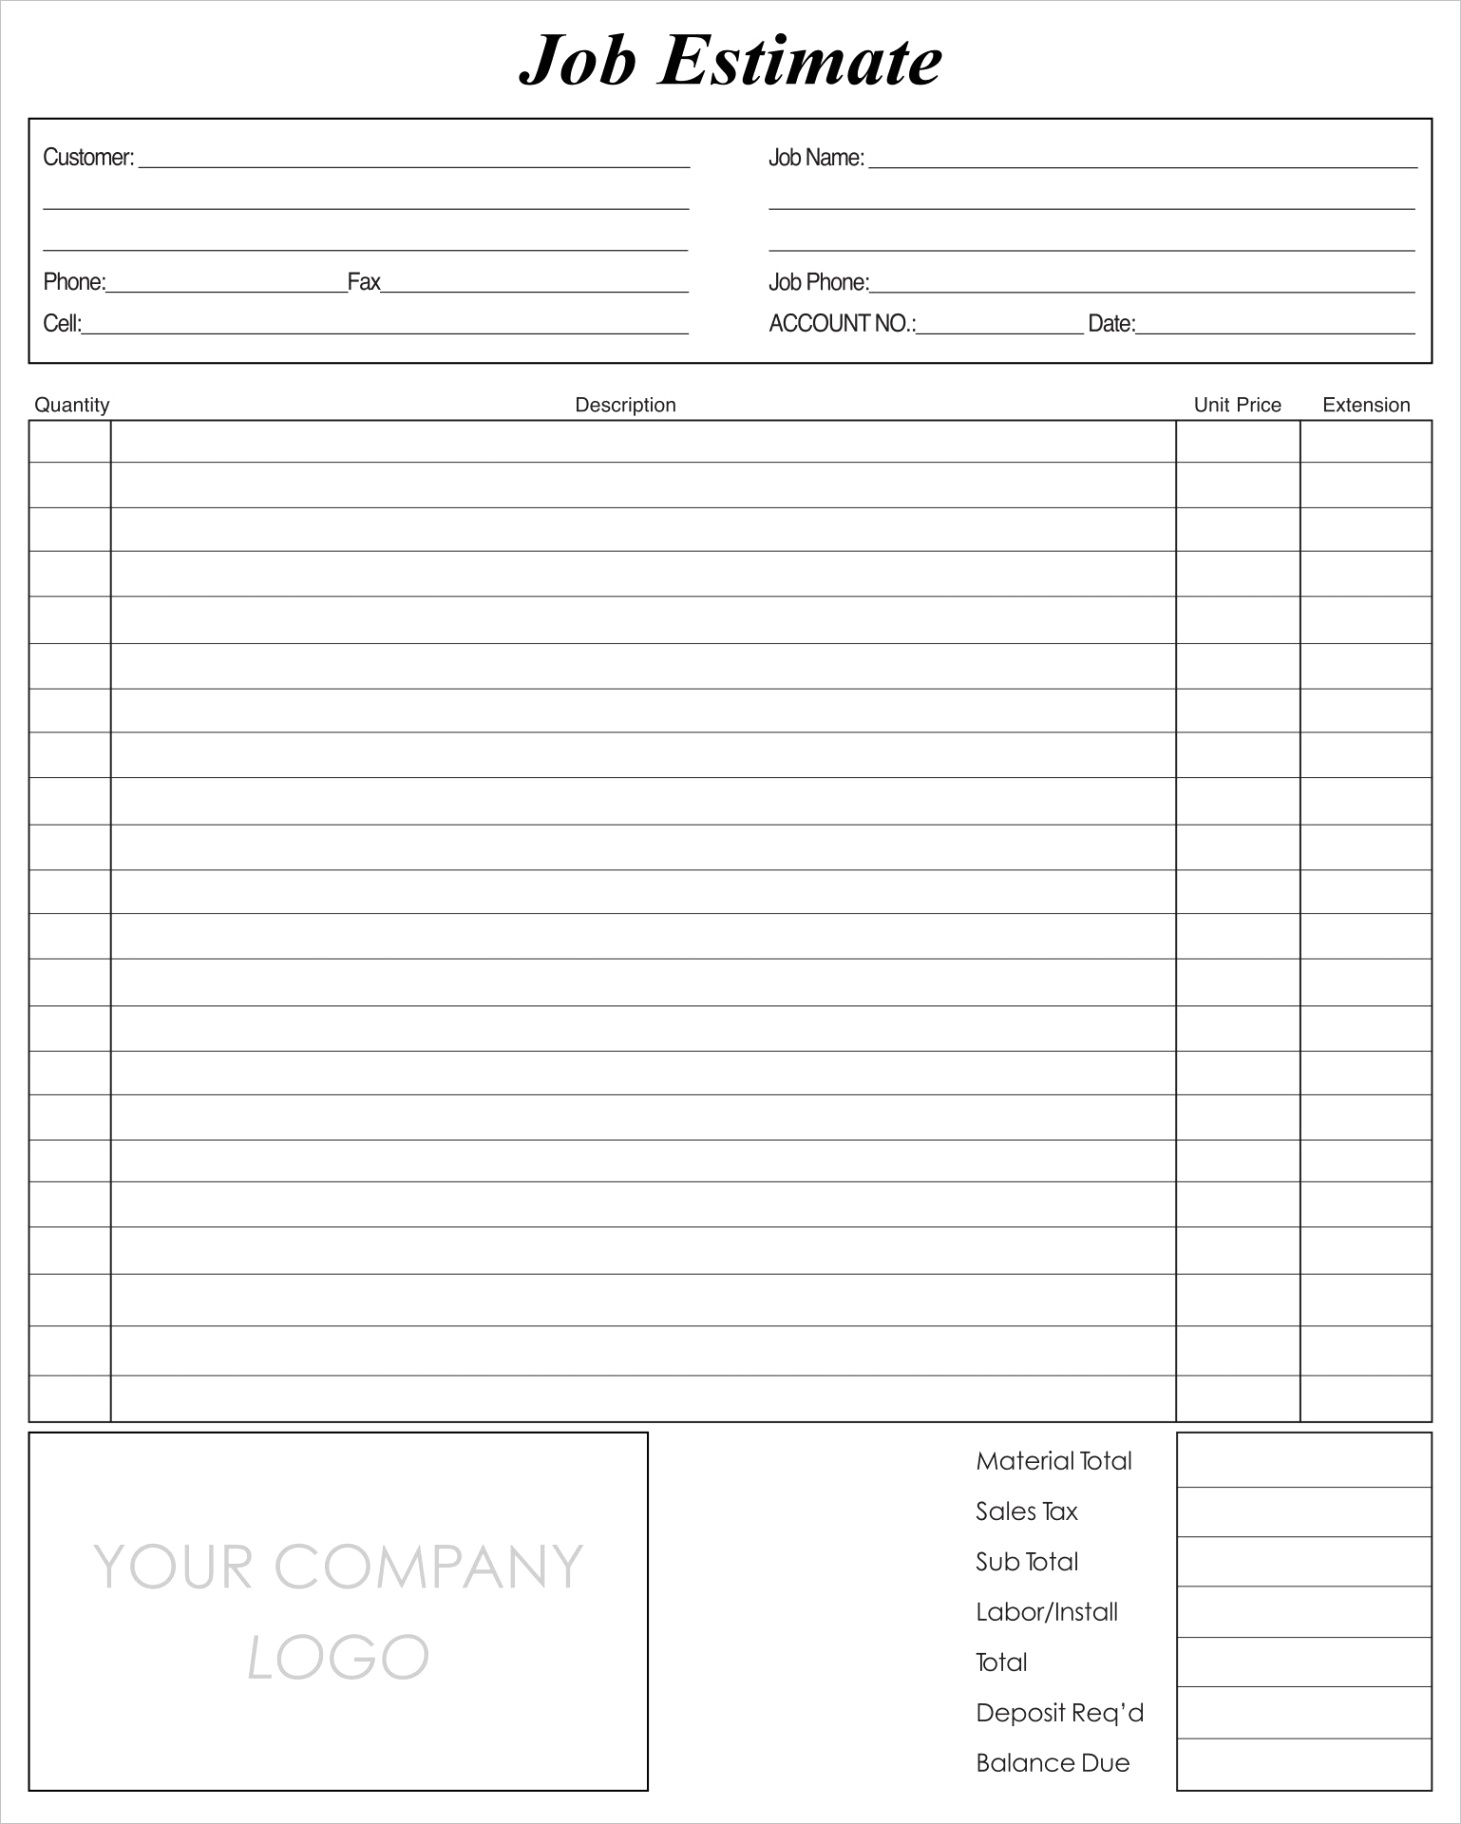 post roofing estimate templates printable